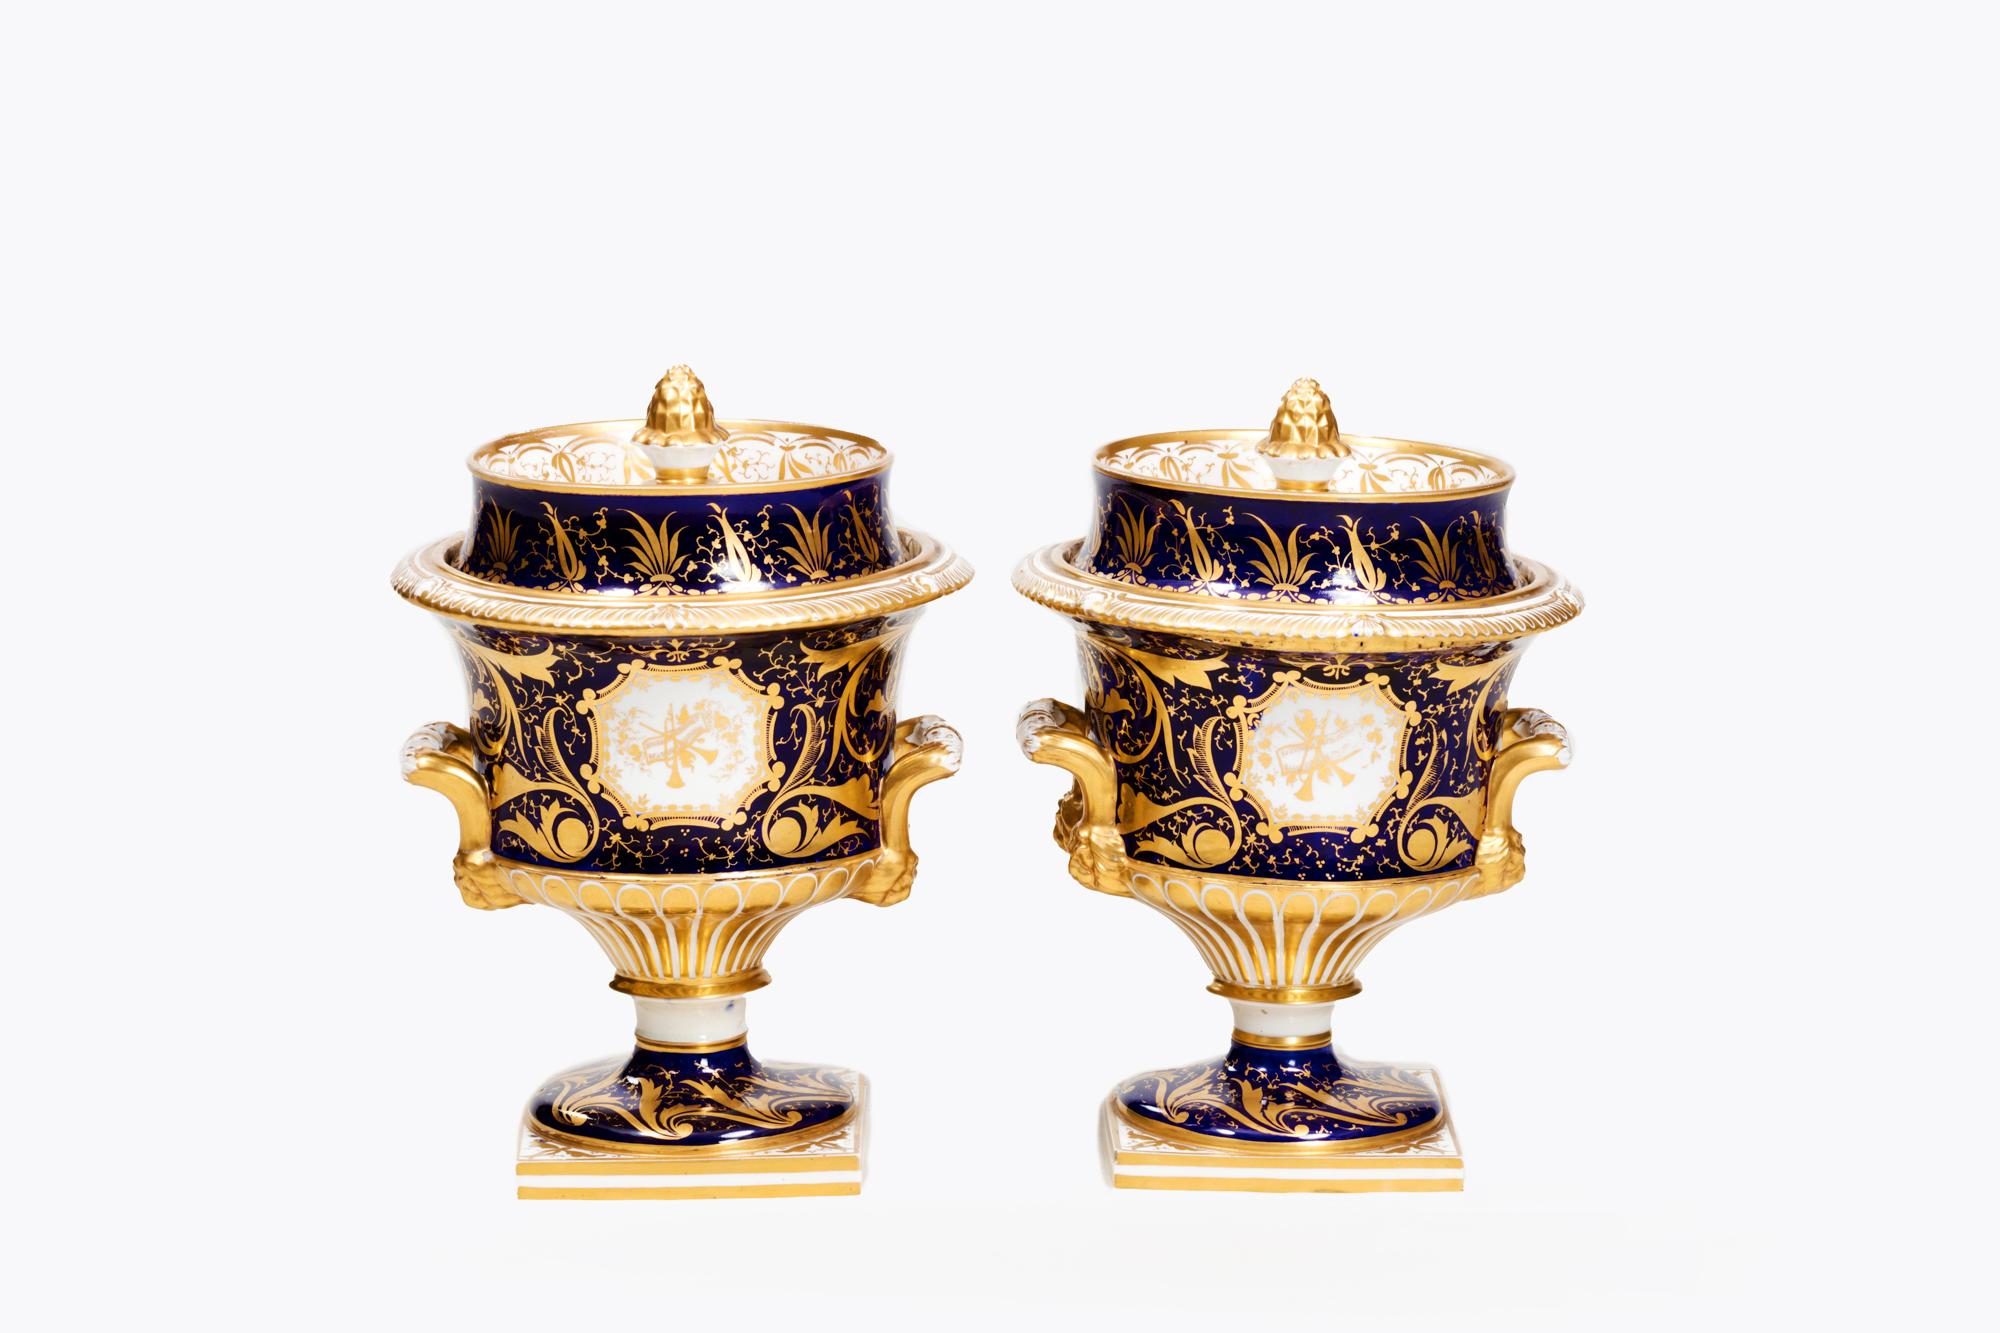 Pair 18th Century Royal Worcester lidded ice pails handpainted with views of Portsmouth Harbour. This pair with acorn finials to the covers and scrolled handles either side of the body are fished with delicate swirling gilt details featuring bands